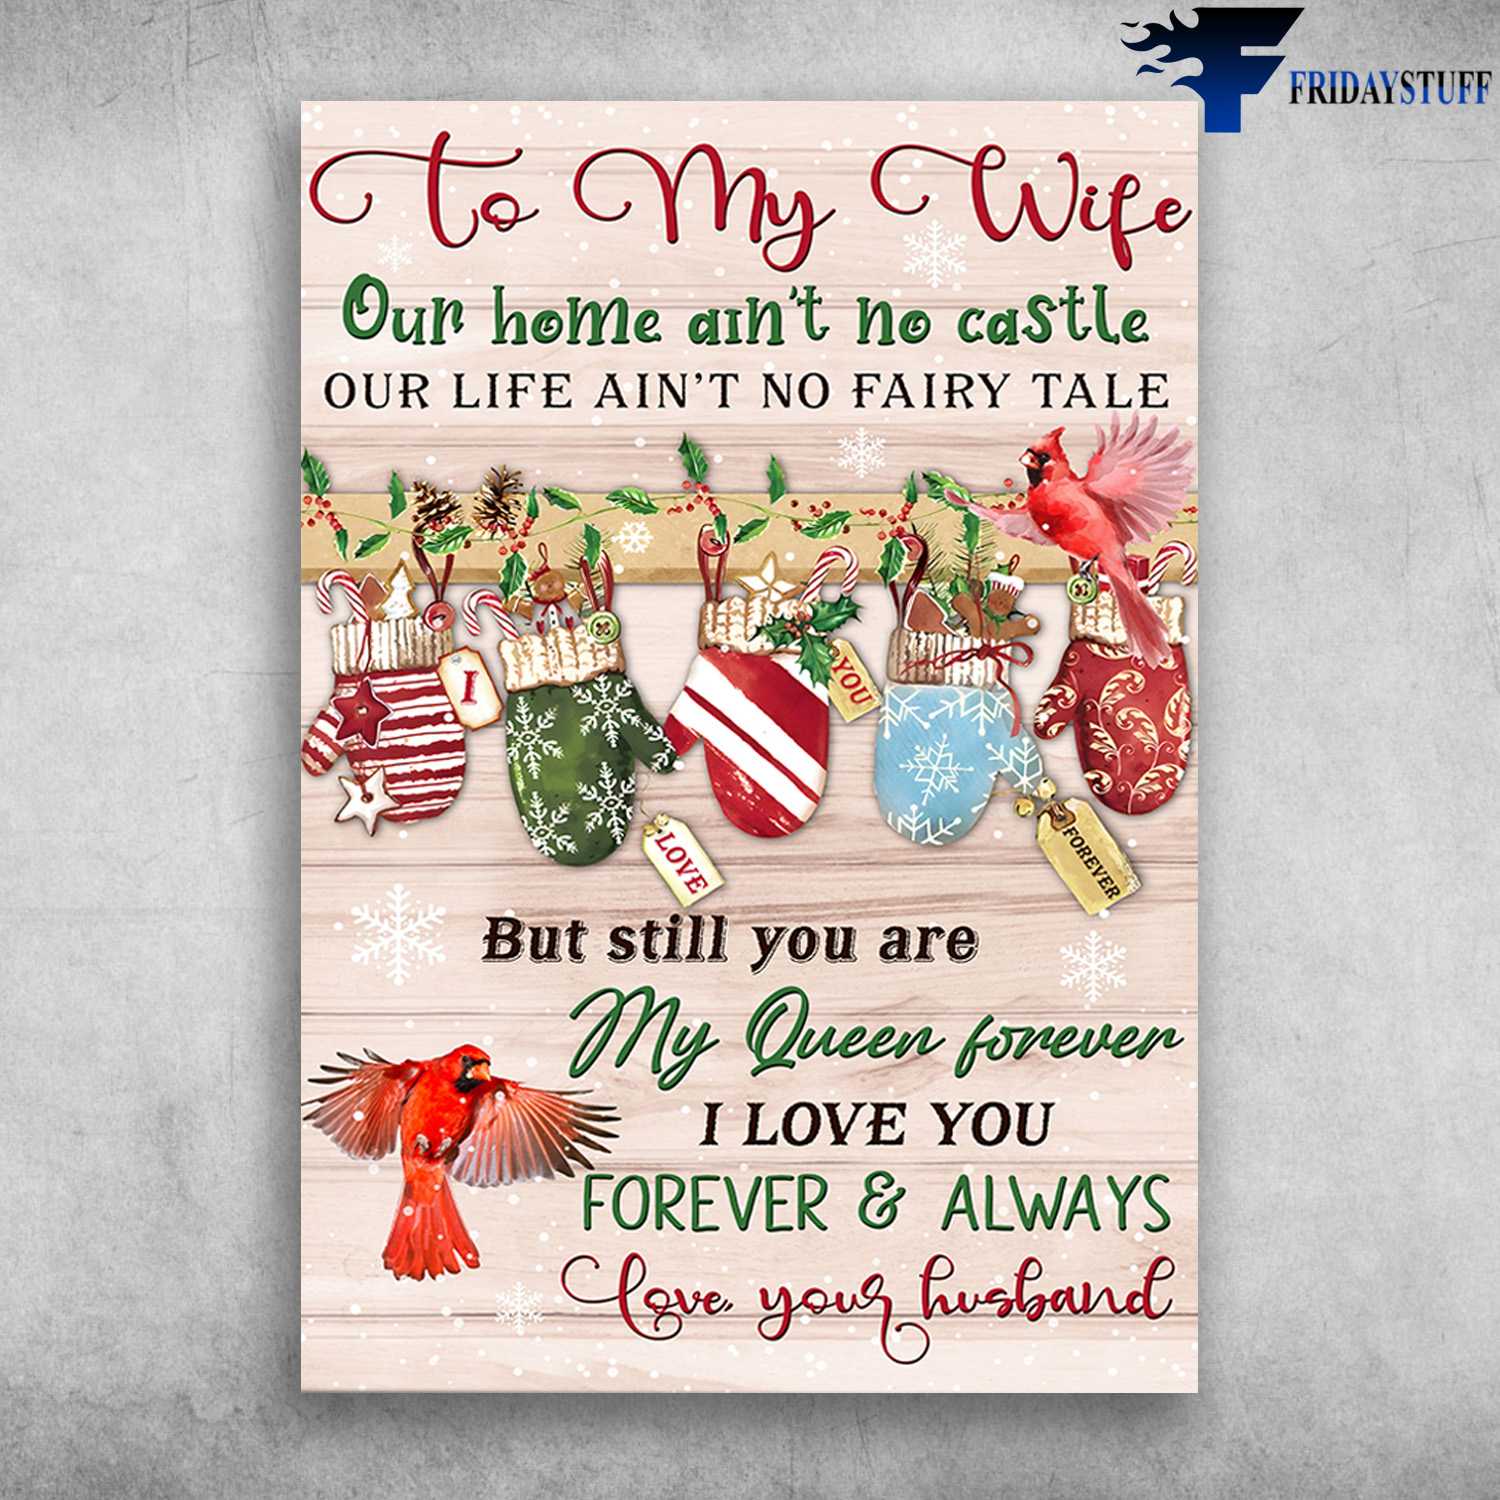 Christmas Decor, Christmas Poster, To My Wife, Our Hime Ain't No Castle, Our Life Ain't No Fairy Tale, But Still You Are My Queen Forever, I Love You